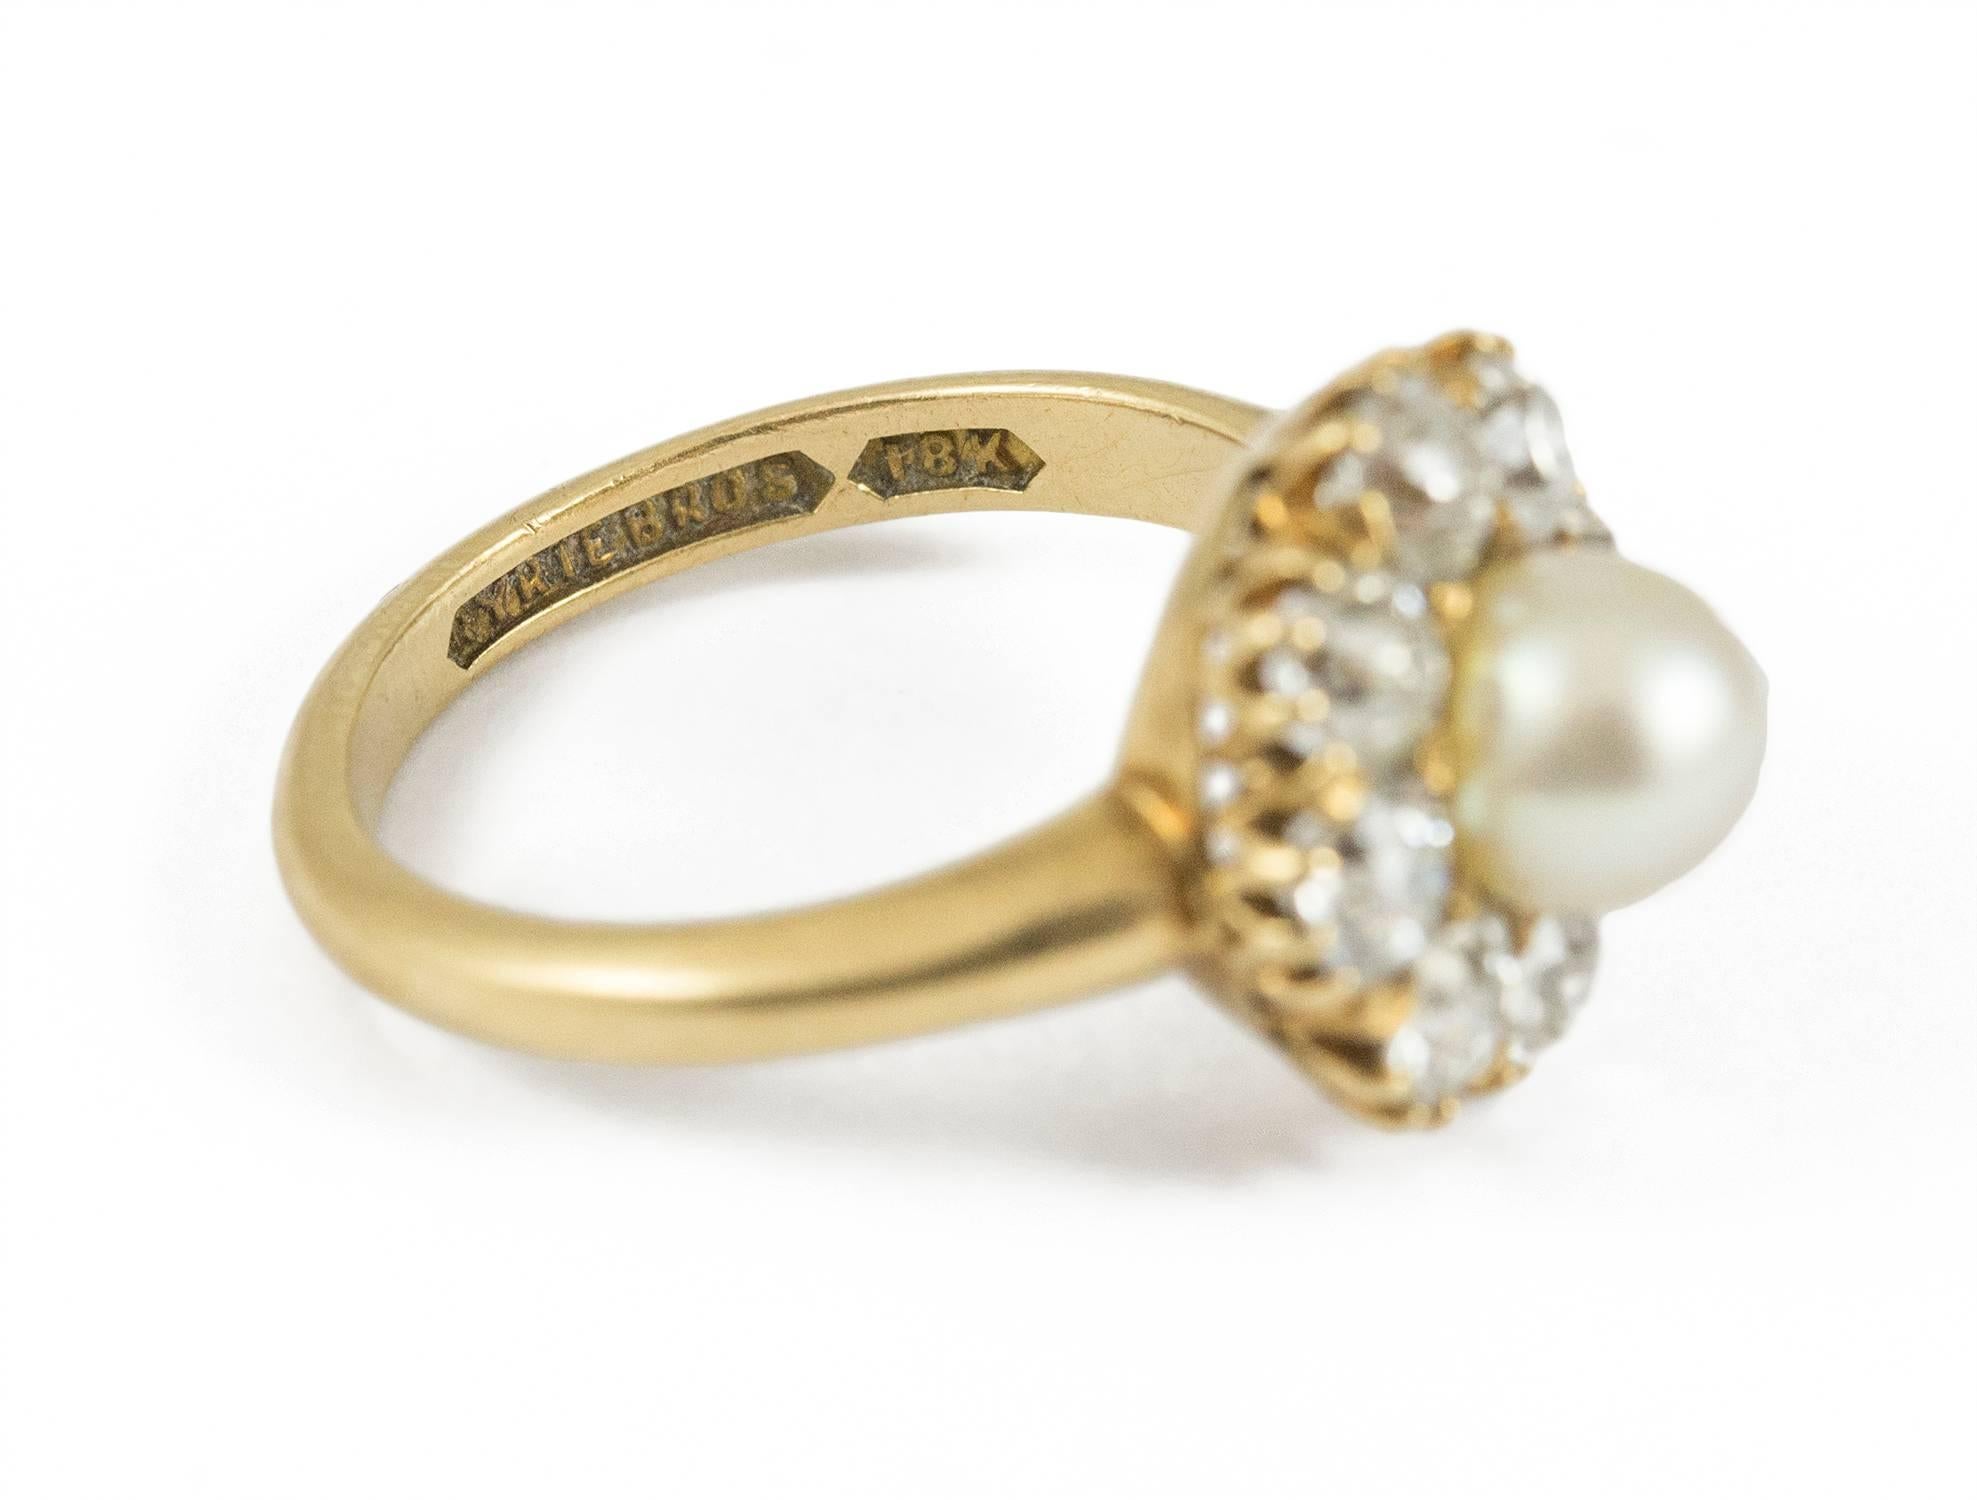 This antique ring was made circa 1905. It is set in 18kt yellow gold and clearly stamped with makers mark and gold carat. The natural pearl is off round and 6.5 to 7mm and is a creamy white colour. It is surrounded by 8 old European cut diamonds